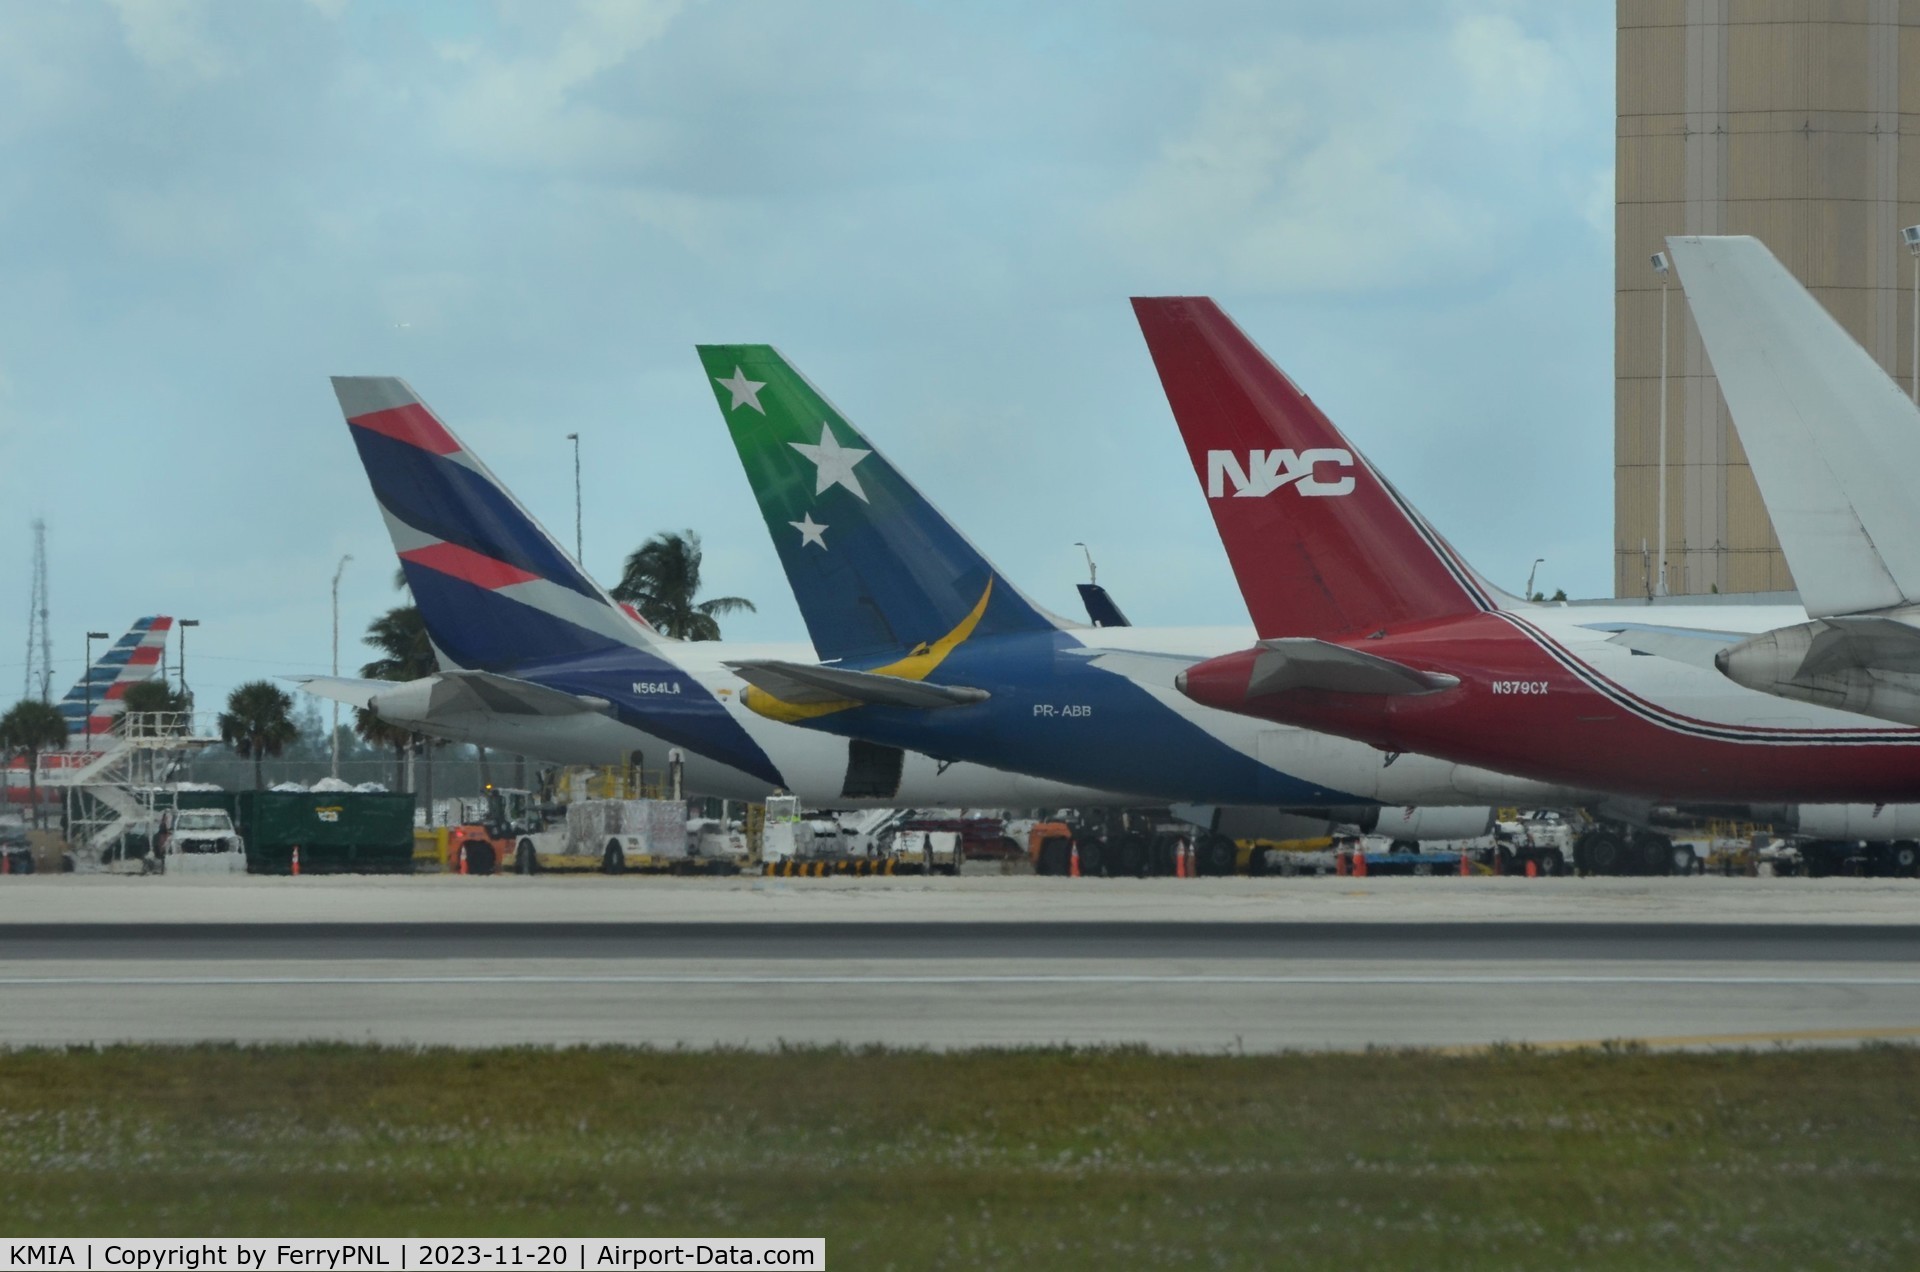 Miami International Airport (MIA) - Colorful line-up of B767 freighters at MIA cargo